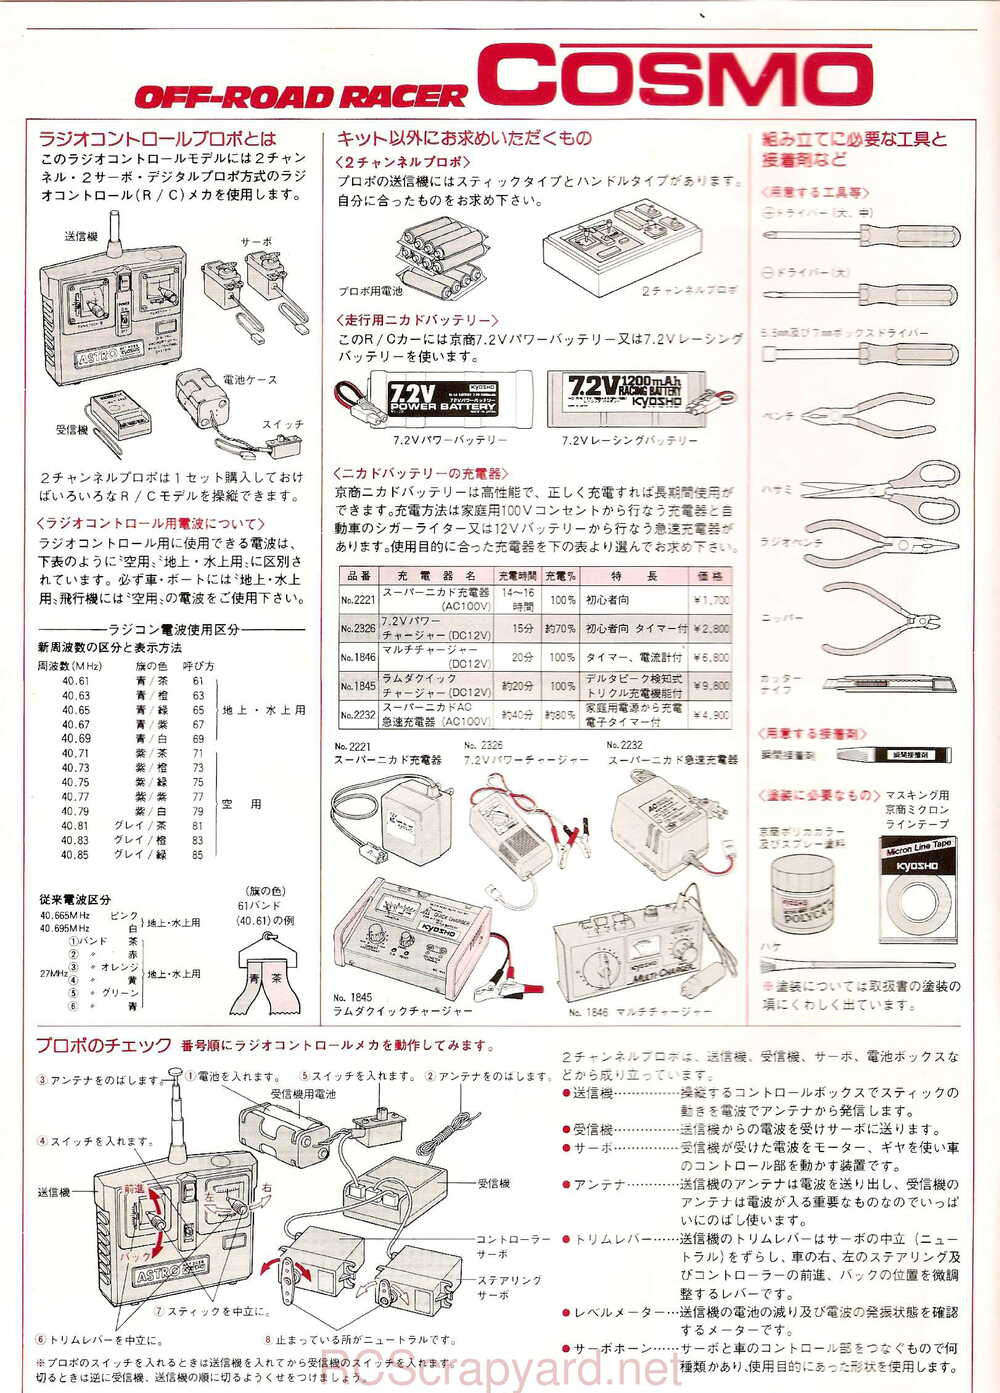 Kyosho - 3084 - Cosmo - Manual - Page 02